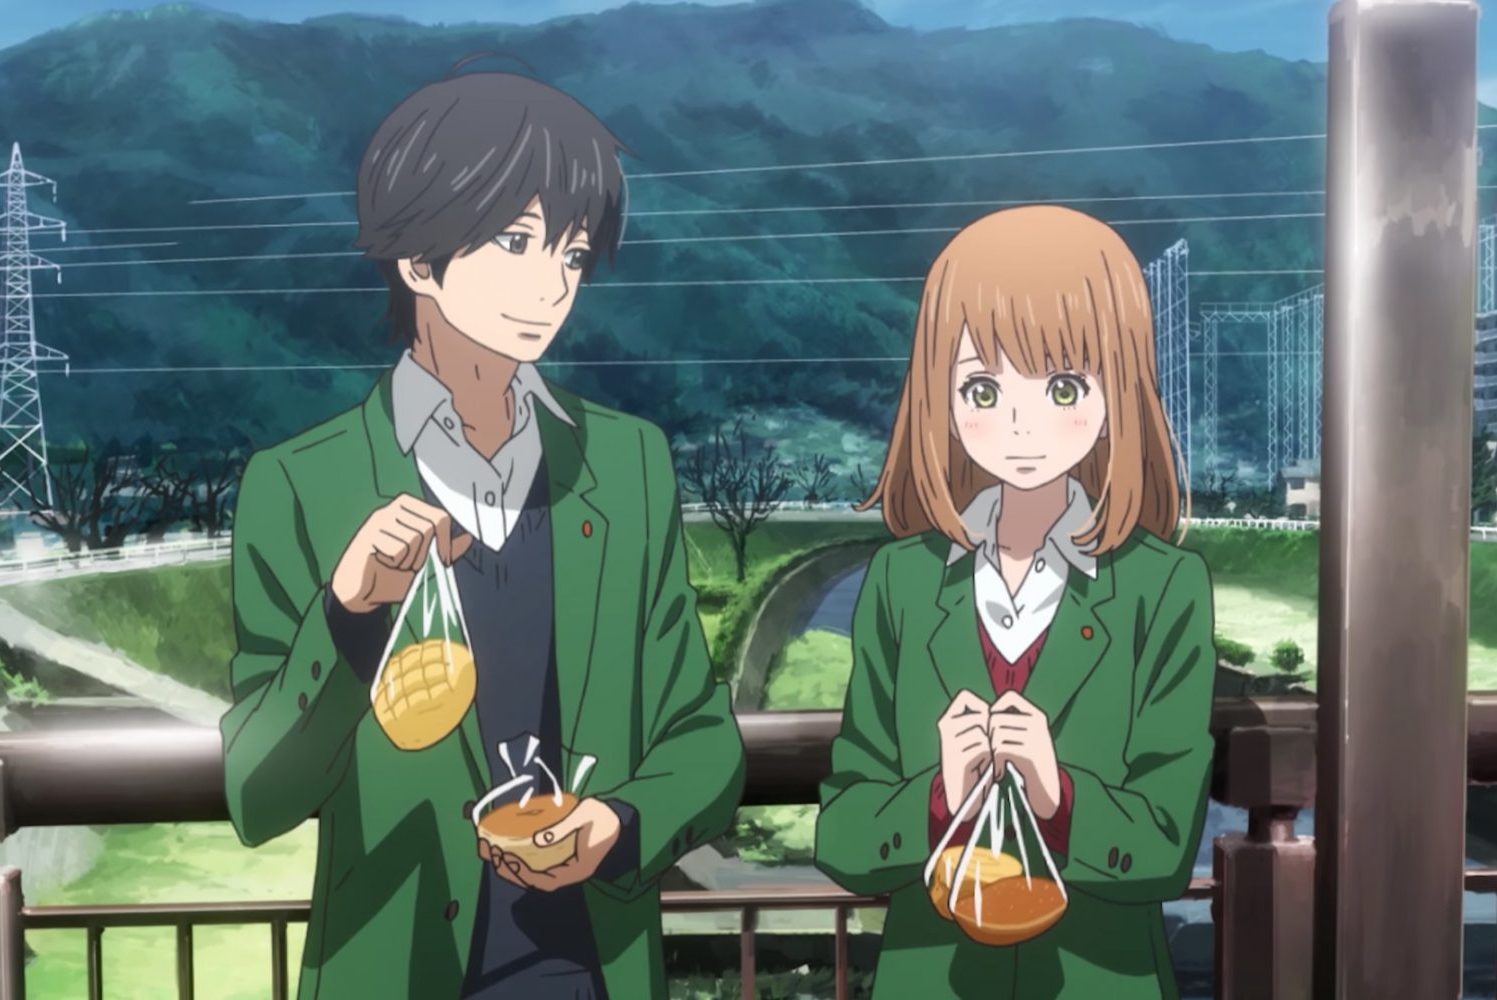 Takamiya Naho receives letters from her future self in the hopes of rewriting the past in orange